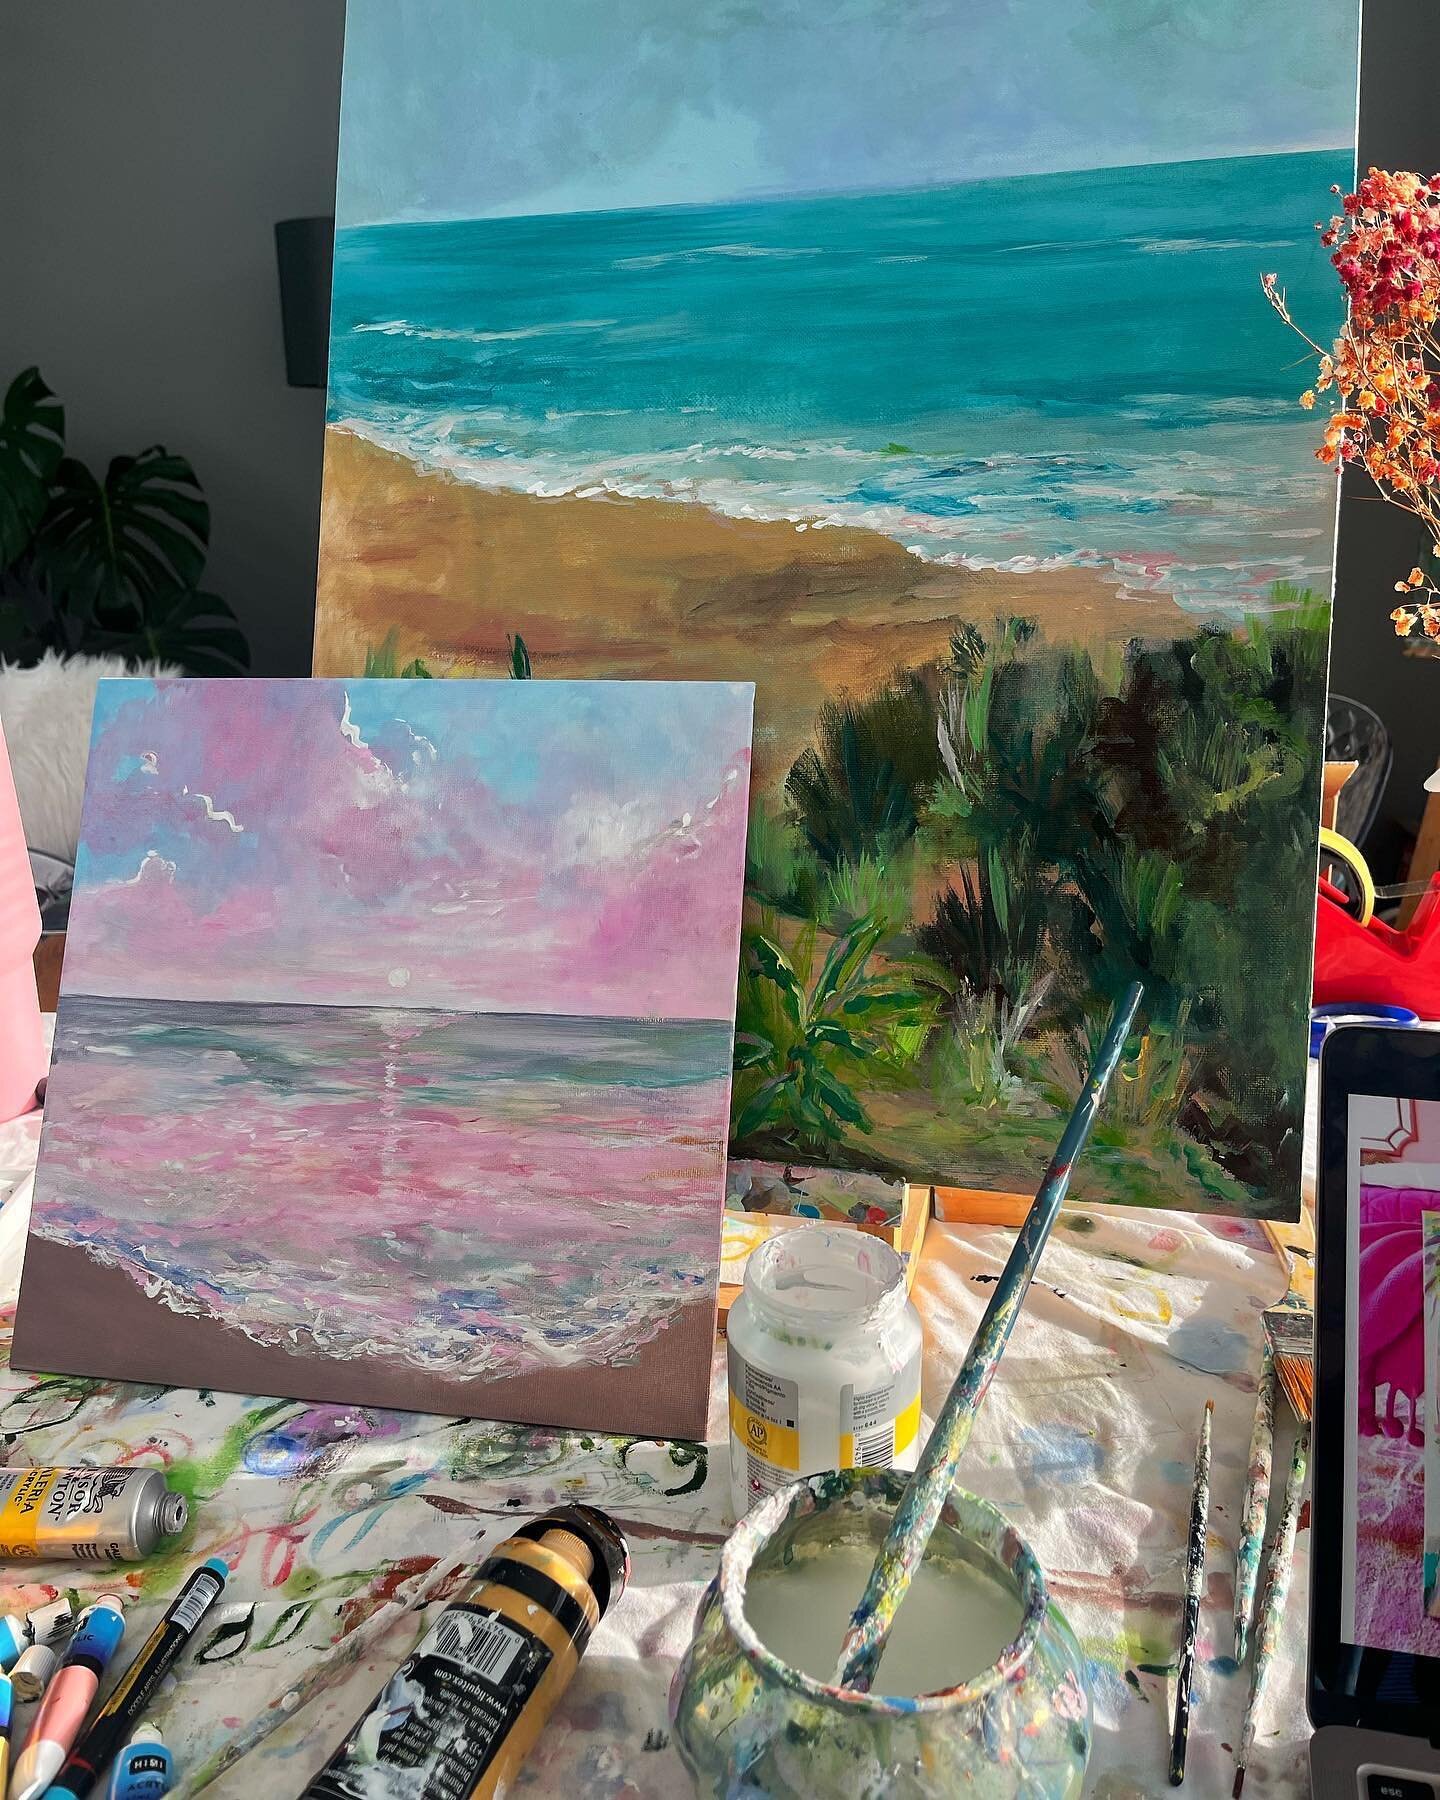 it&rsquo;s been a good day painting &lt;3 💘

some days the painting just flowwwws &amp; i&rsquo;m so excited about the new work i&rsquo;m creating 💘 it feels good to be painting again 🪄🪄🪄 I feel a new collection coming along 🌊🐚🌴

🐚🌴☁️💘

#a